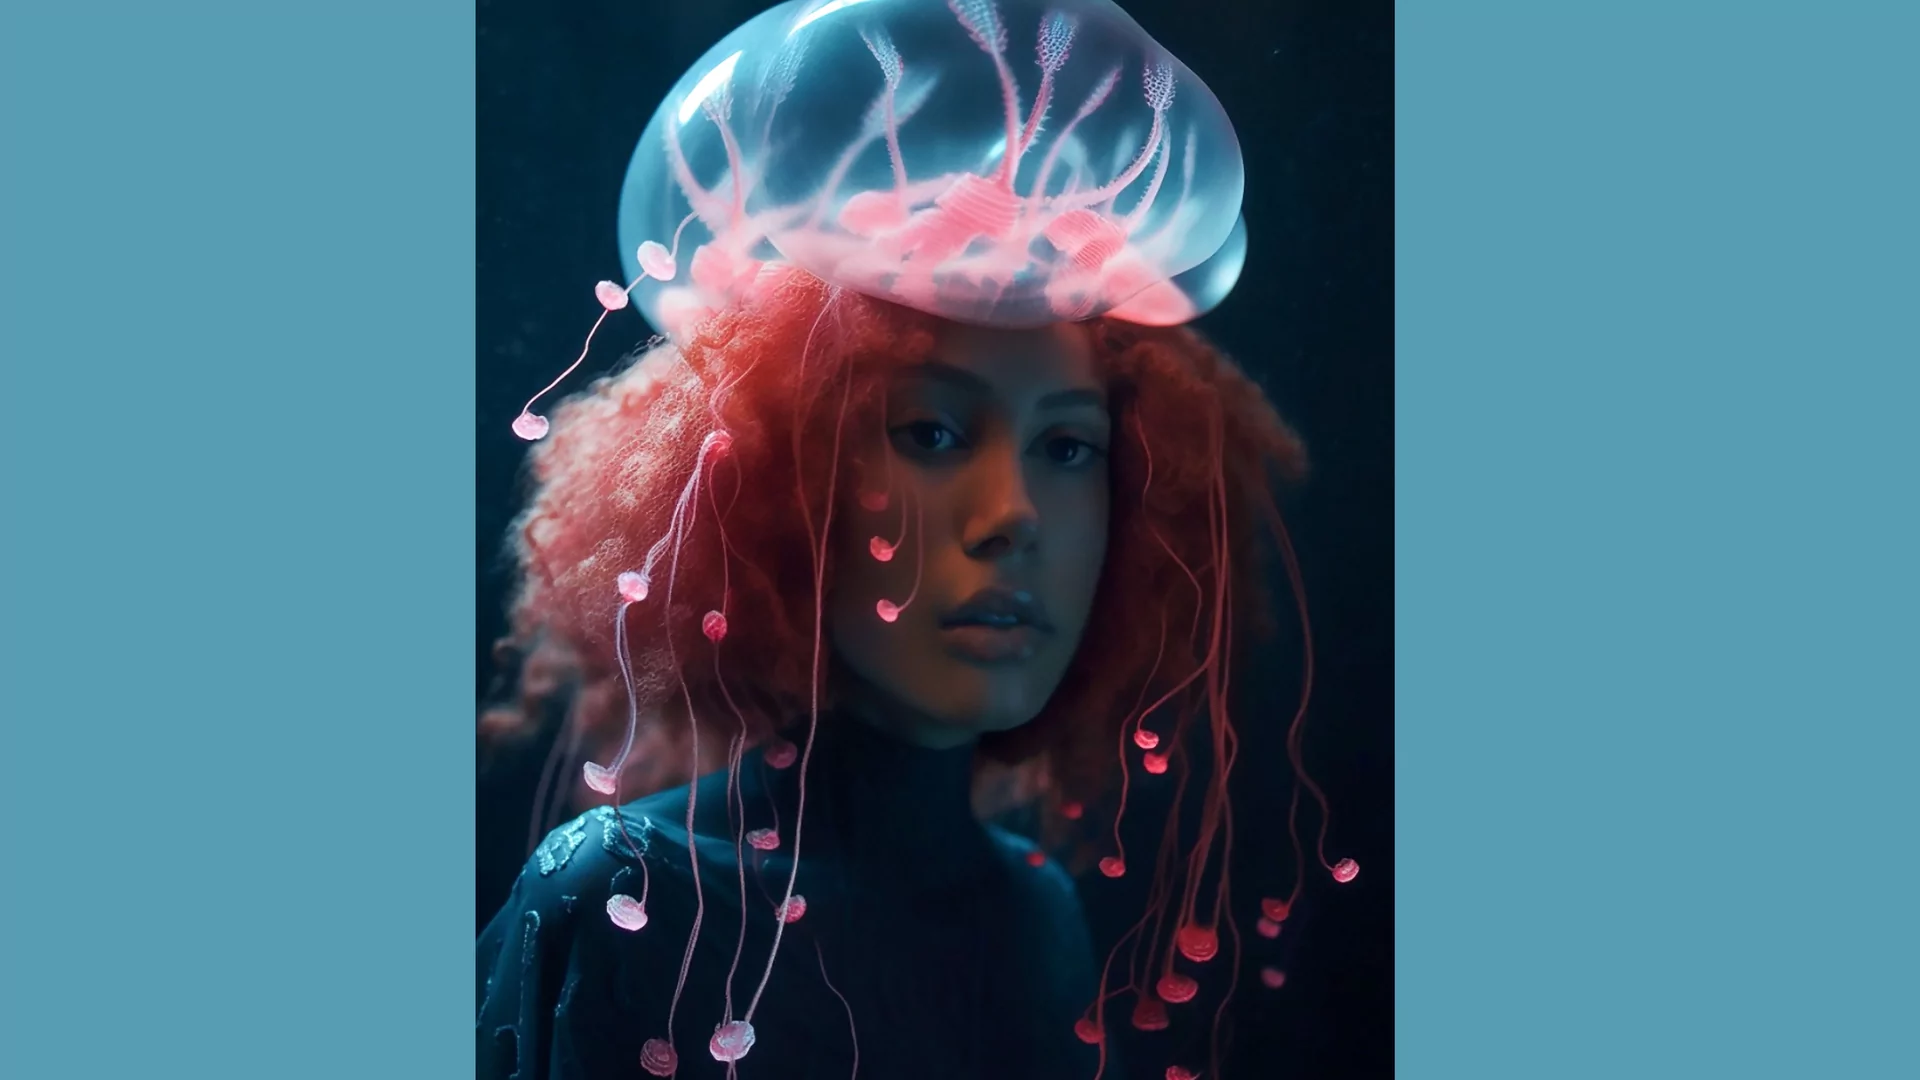 Cover of DJ Mag's May issue with Jayda G. The photo shows her with red curly hair with an alien, jellyfish-like shape on her head.